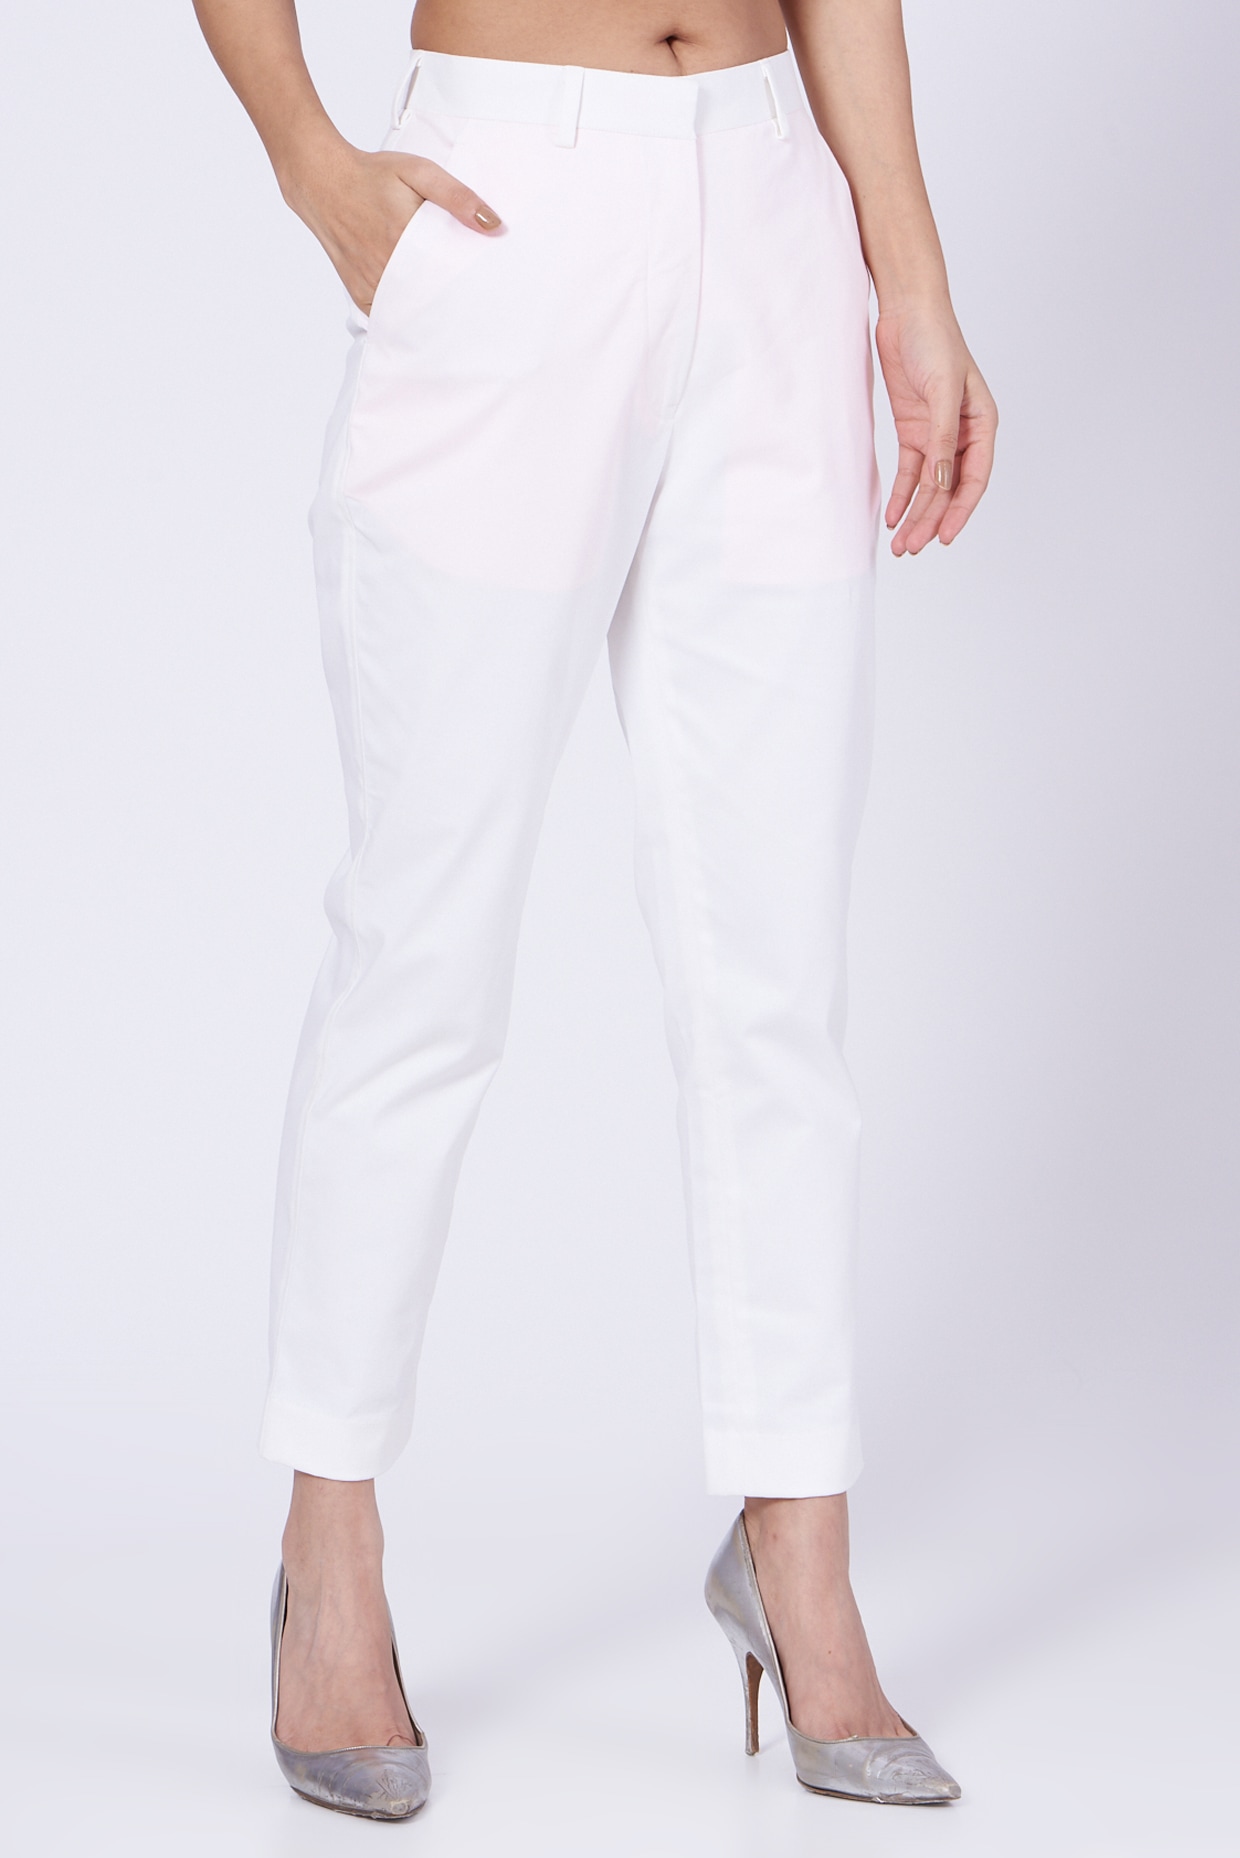 Buy Off White Pure Silk Charmeuse Satin Top And Trouser Set With Sash Belt  For Women by LABEL IVISH Online at Aza Fashions.